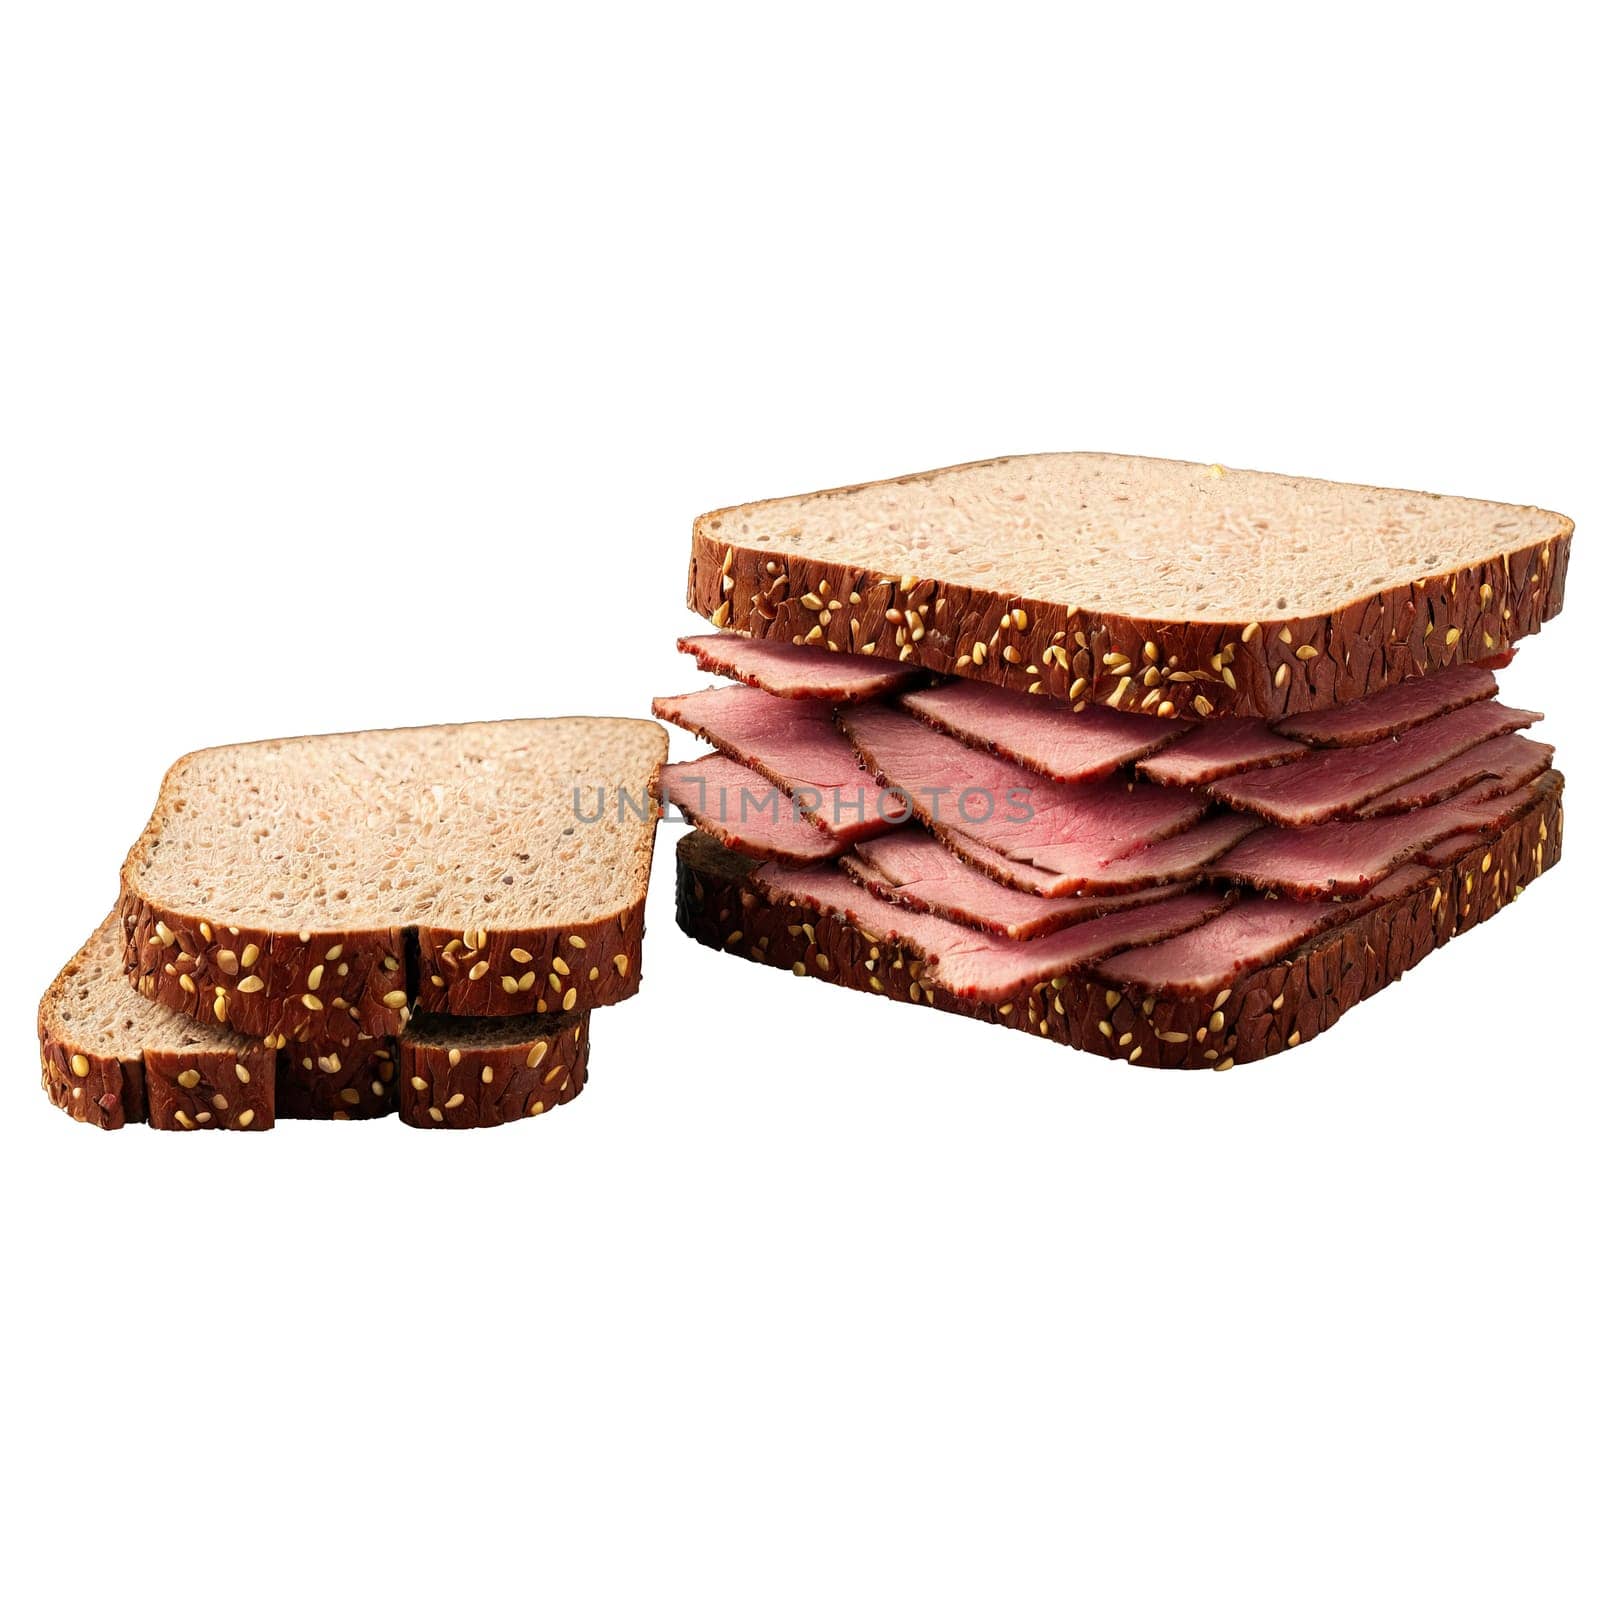 Pastrami sandwich thinly sliced pastrami spicy brown mustard rye bread Culinary and Food concept Final by panophotograph